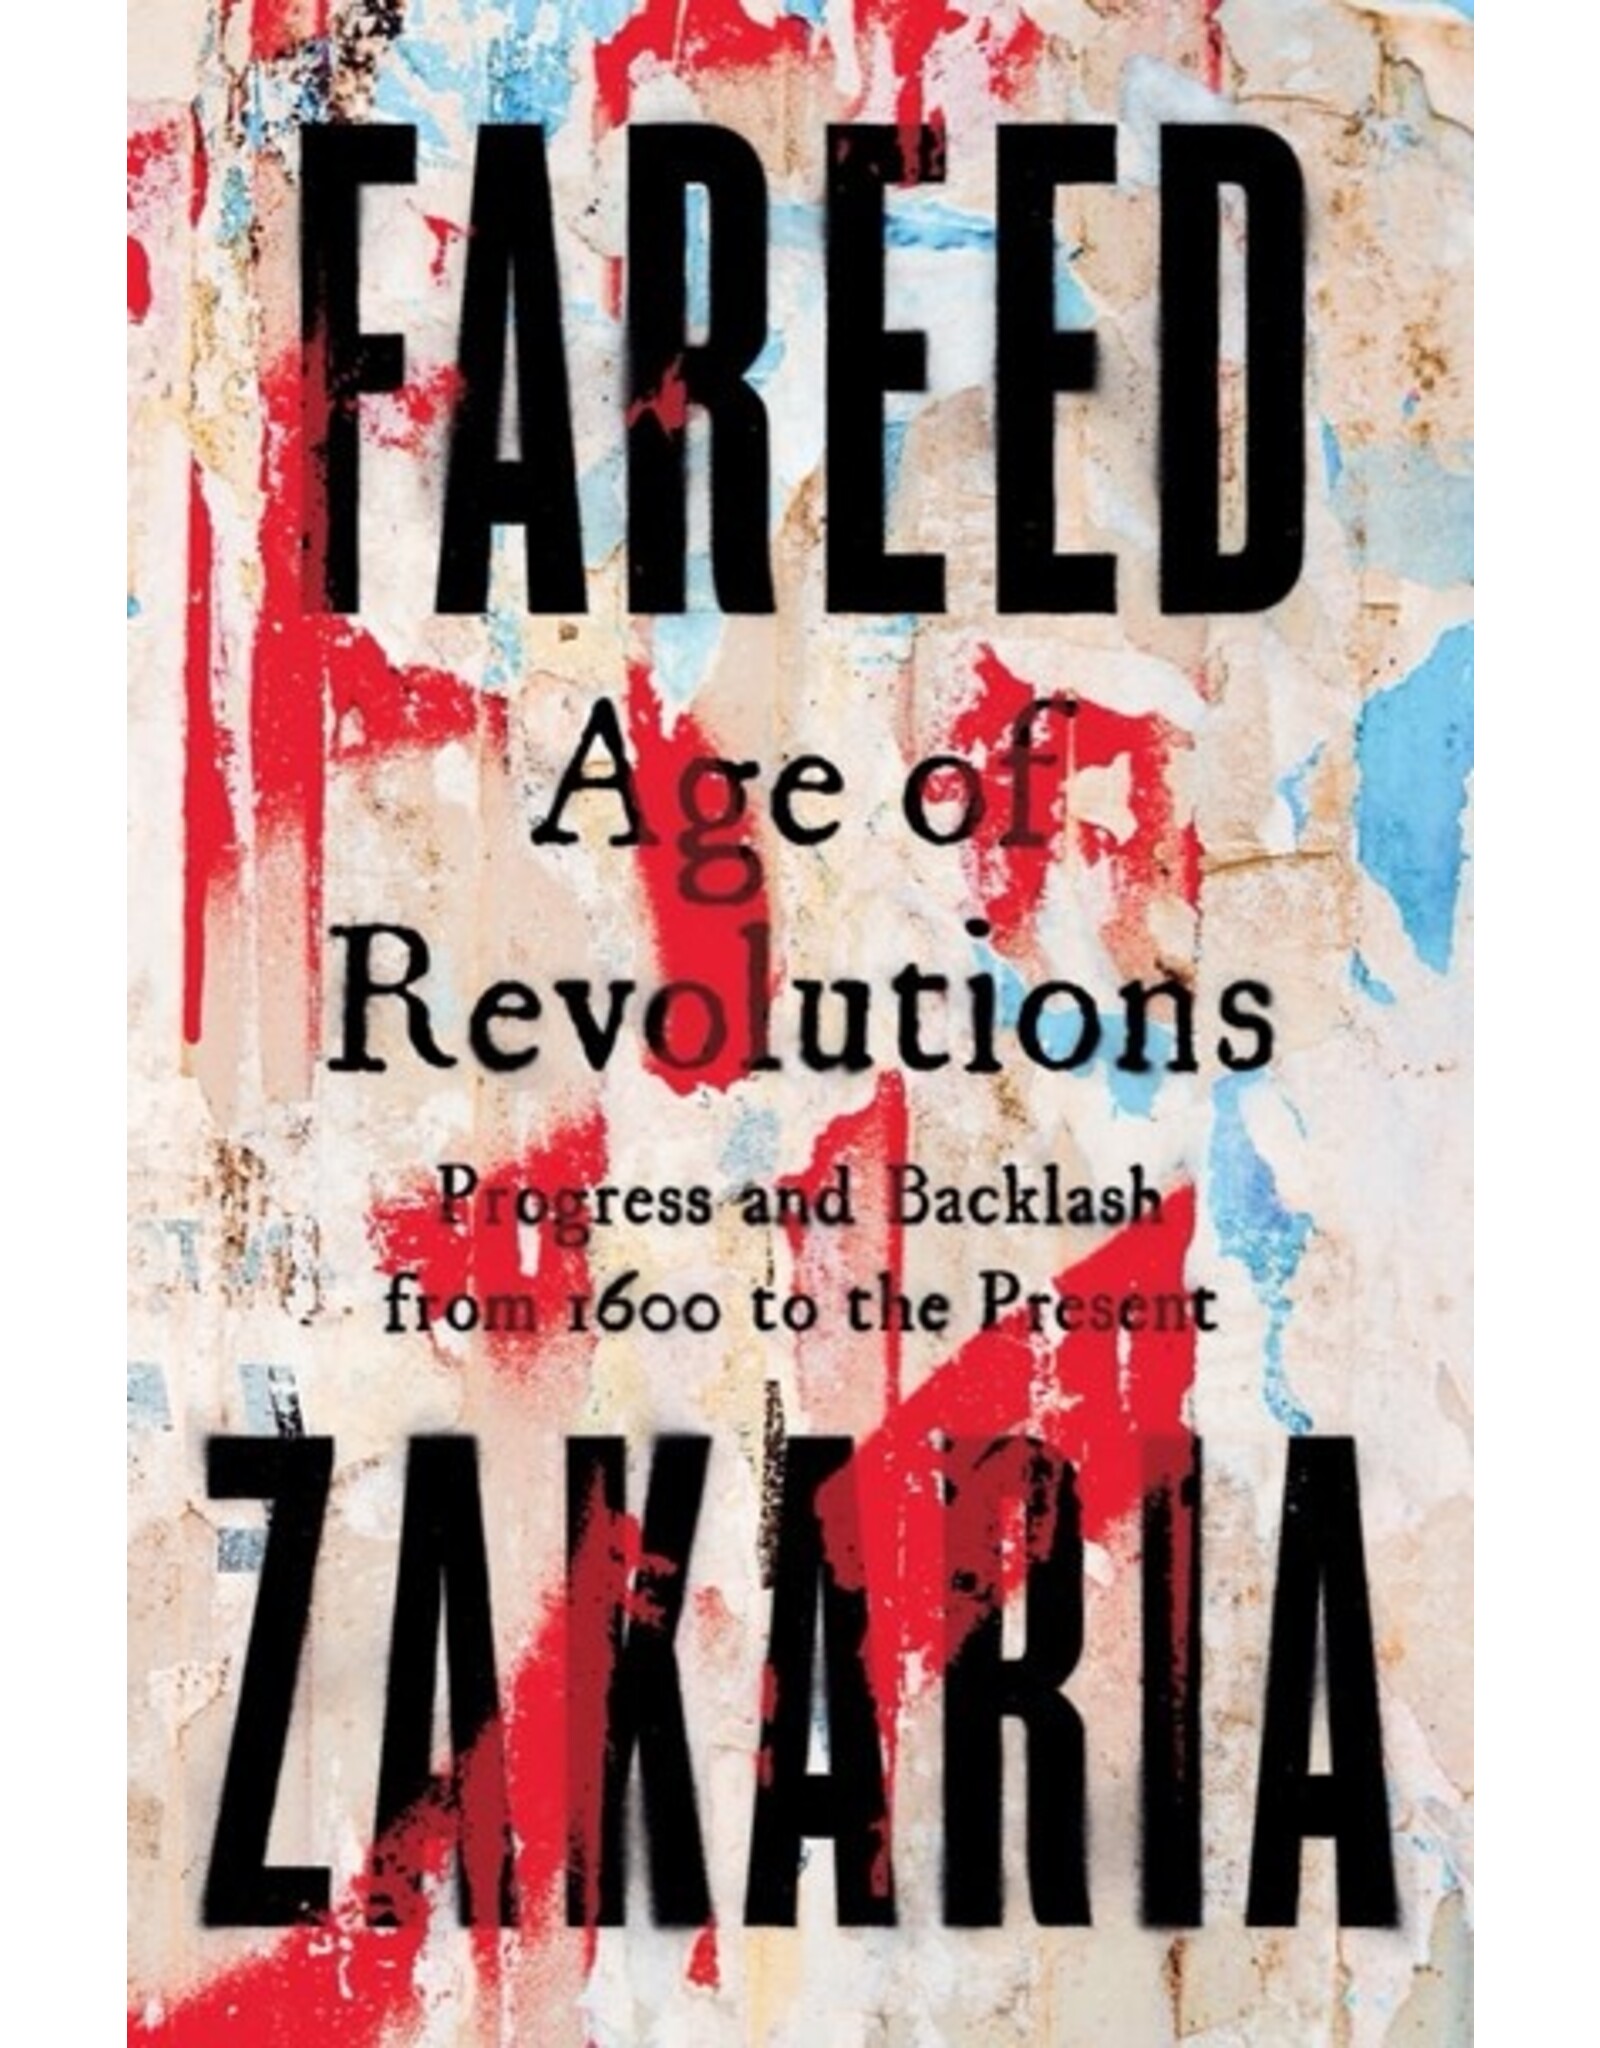 Books Age of Revolutions : Progress and Backlash from 1600 to the Present by Fareed Zakaria